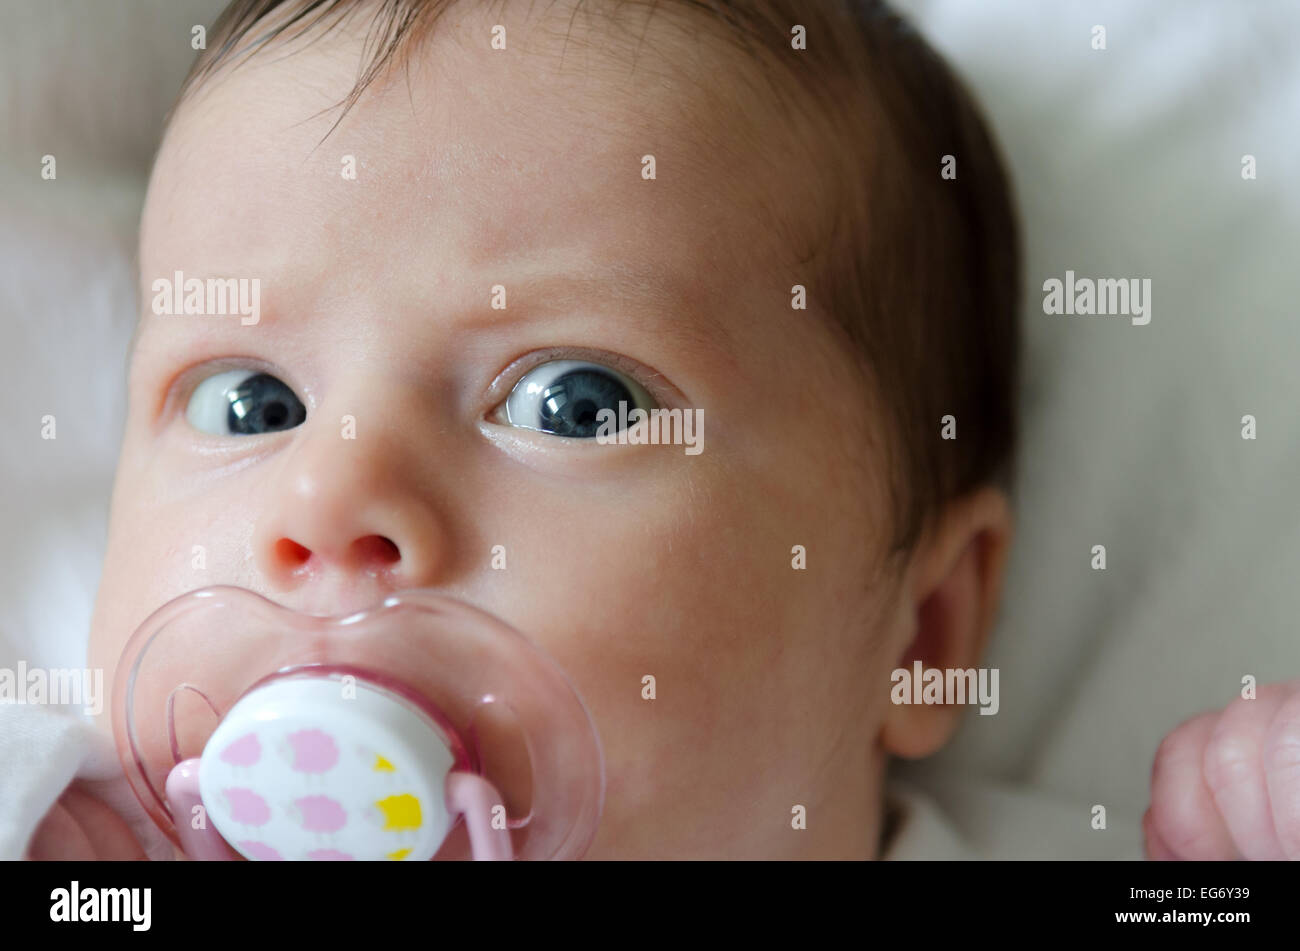 A newborn baby with a dummy lying down on white sheets Stock Photo